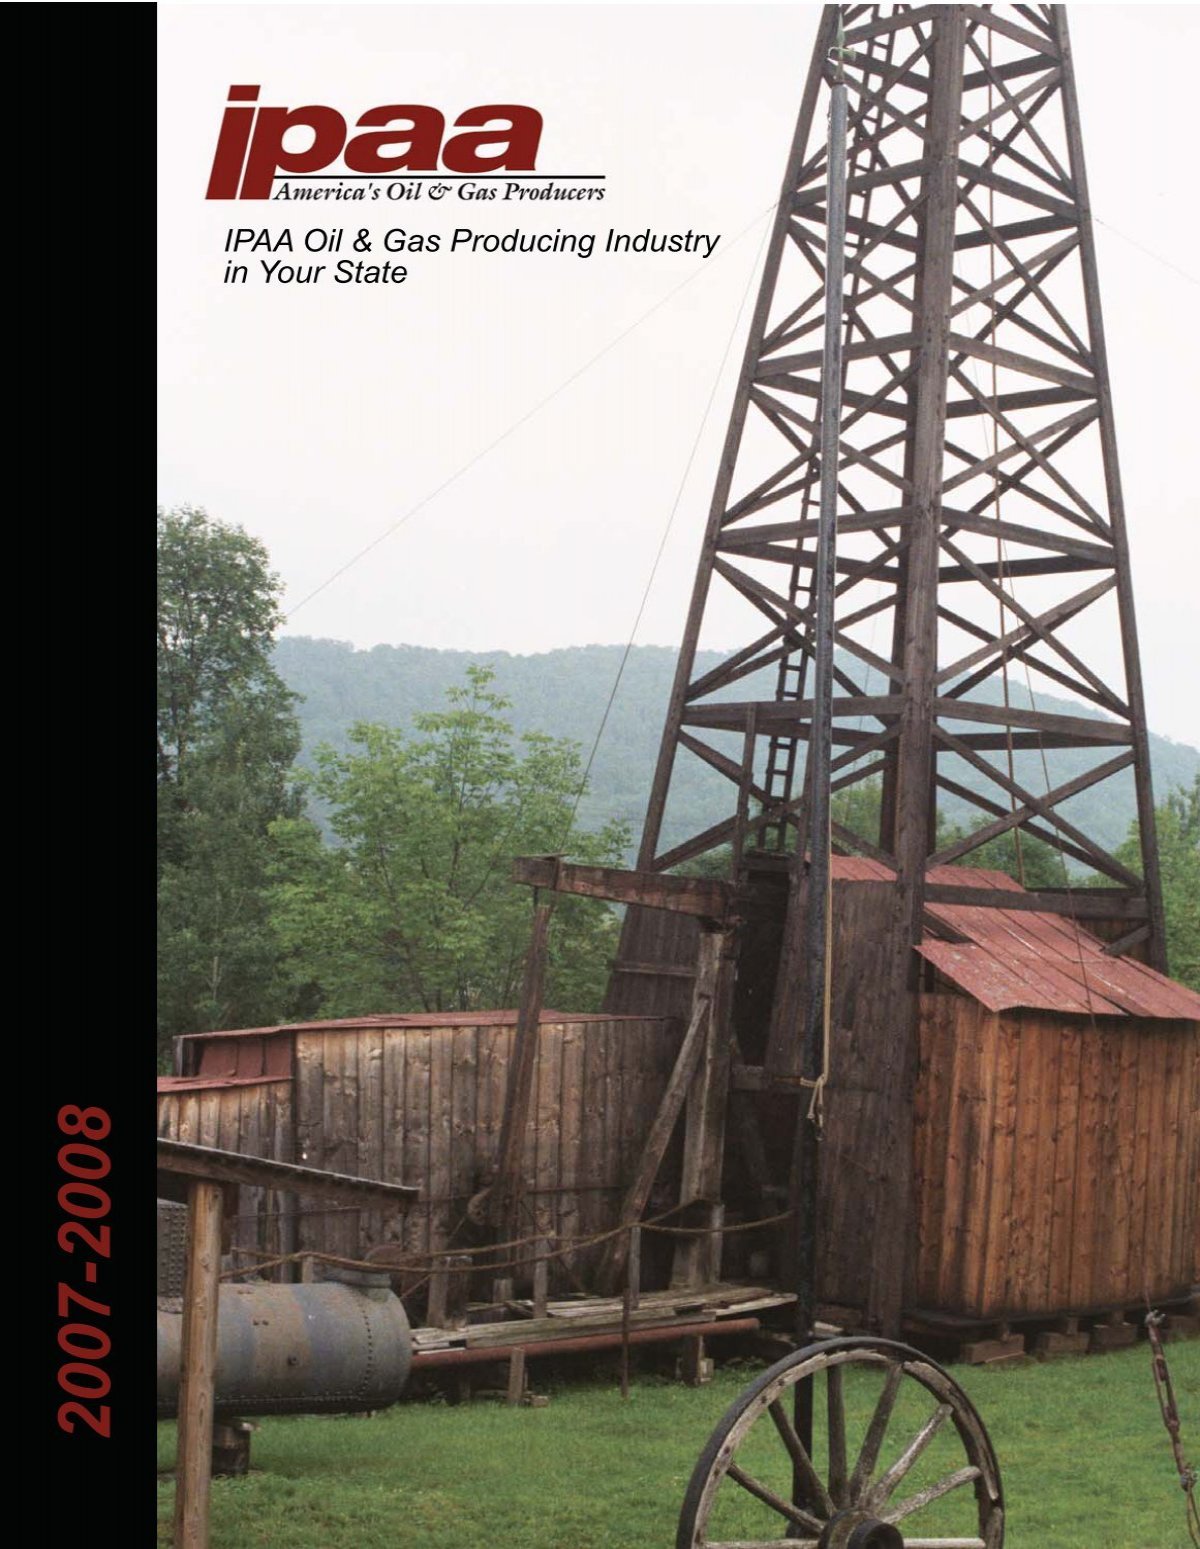 IPAA Oil & Gas Producing Industry in Your State - Energy in Depth